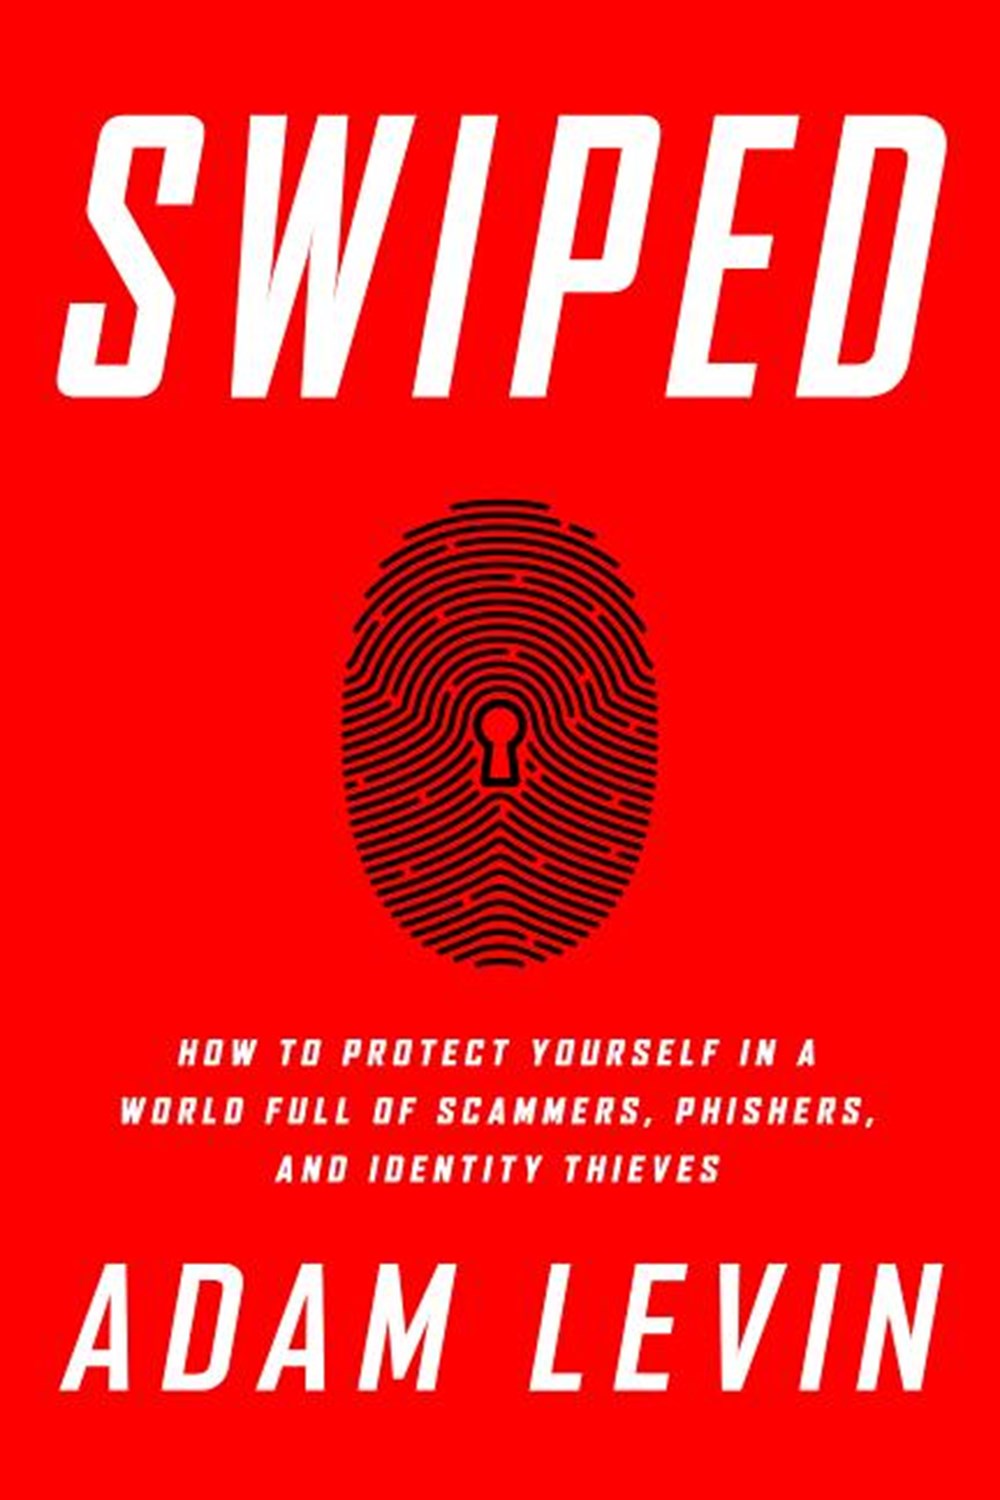 Swiped How to Protect Yourself in a World Full of Scammers, Phishers, and Identity Thieves